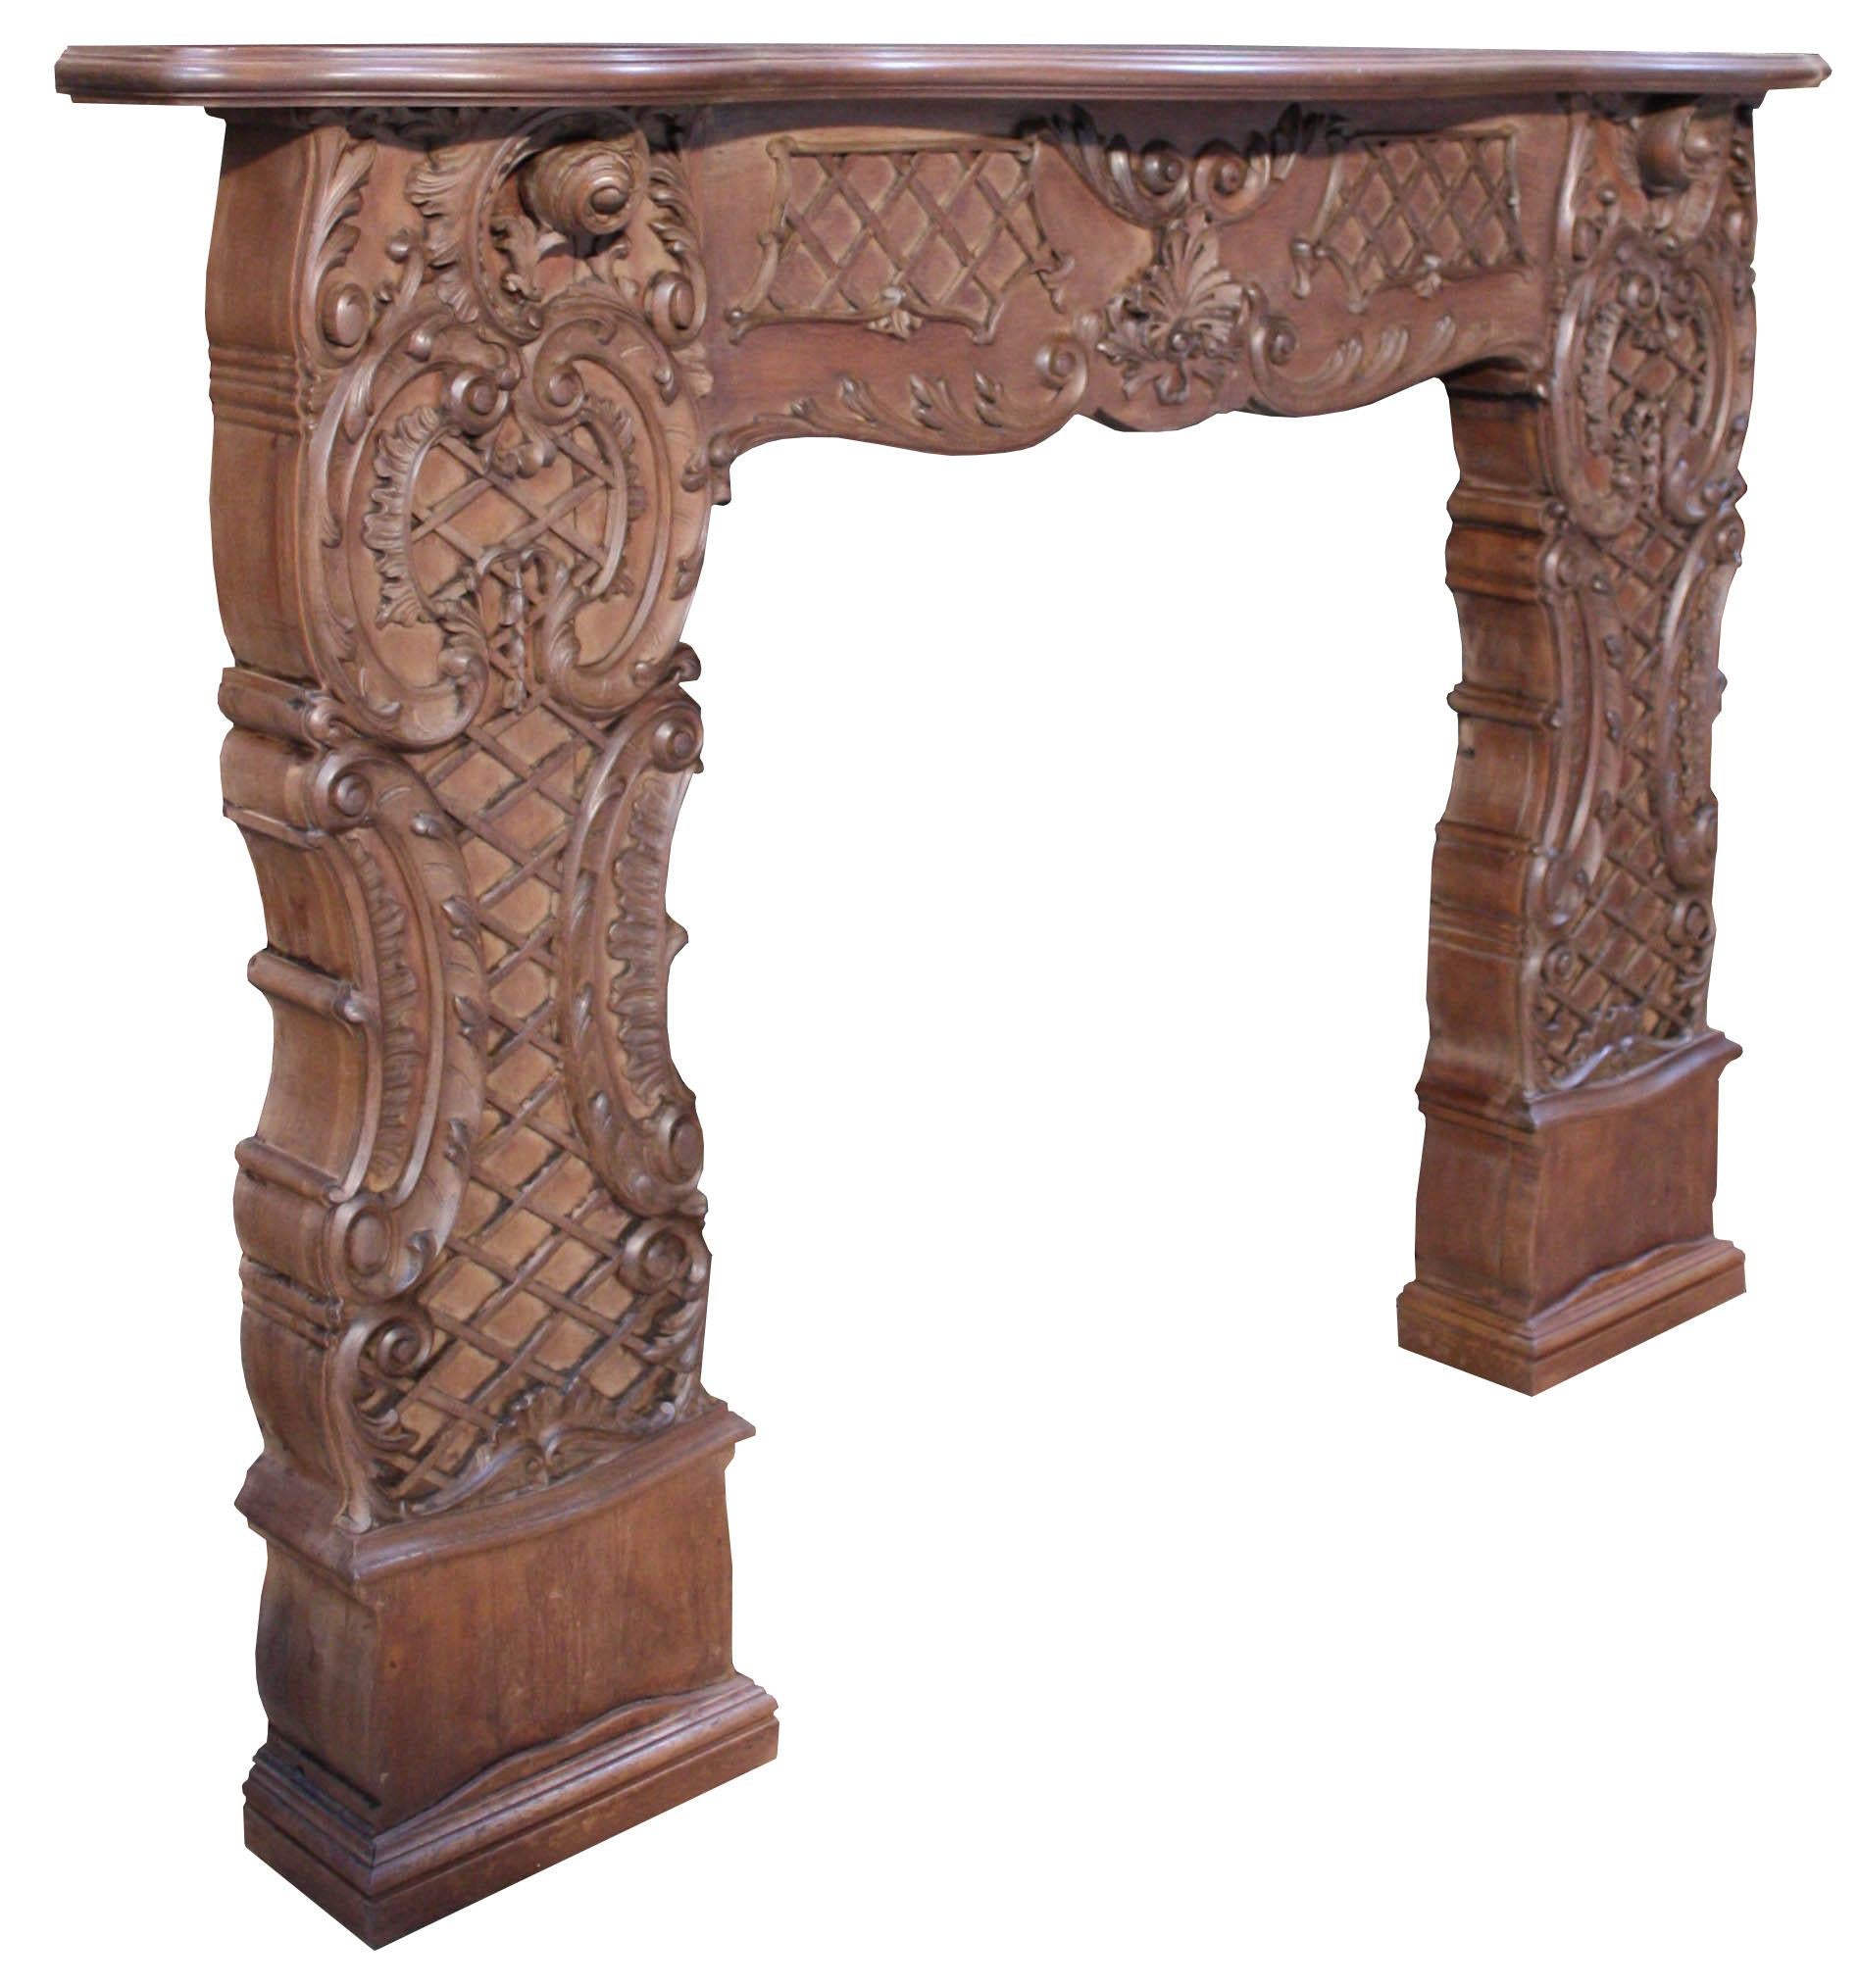 Antique Rococo Style Mahogany Fire Mantel In Good Condition For Sale In Wormelow, Herefordshire